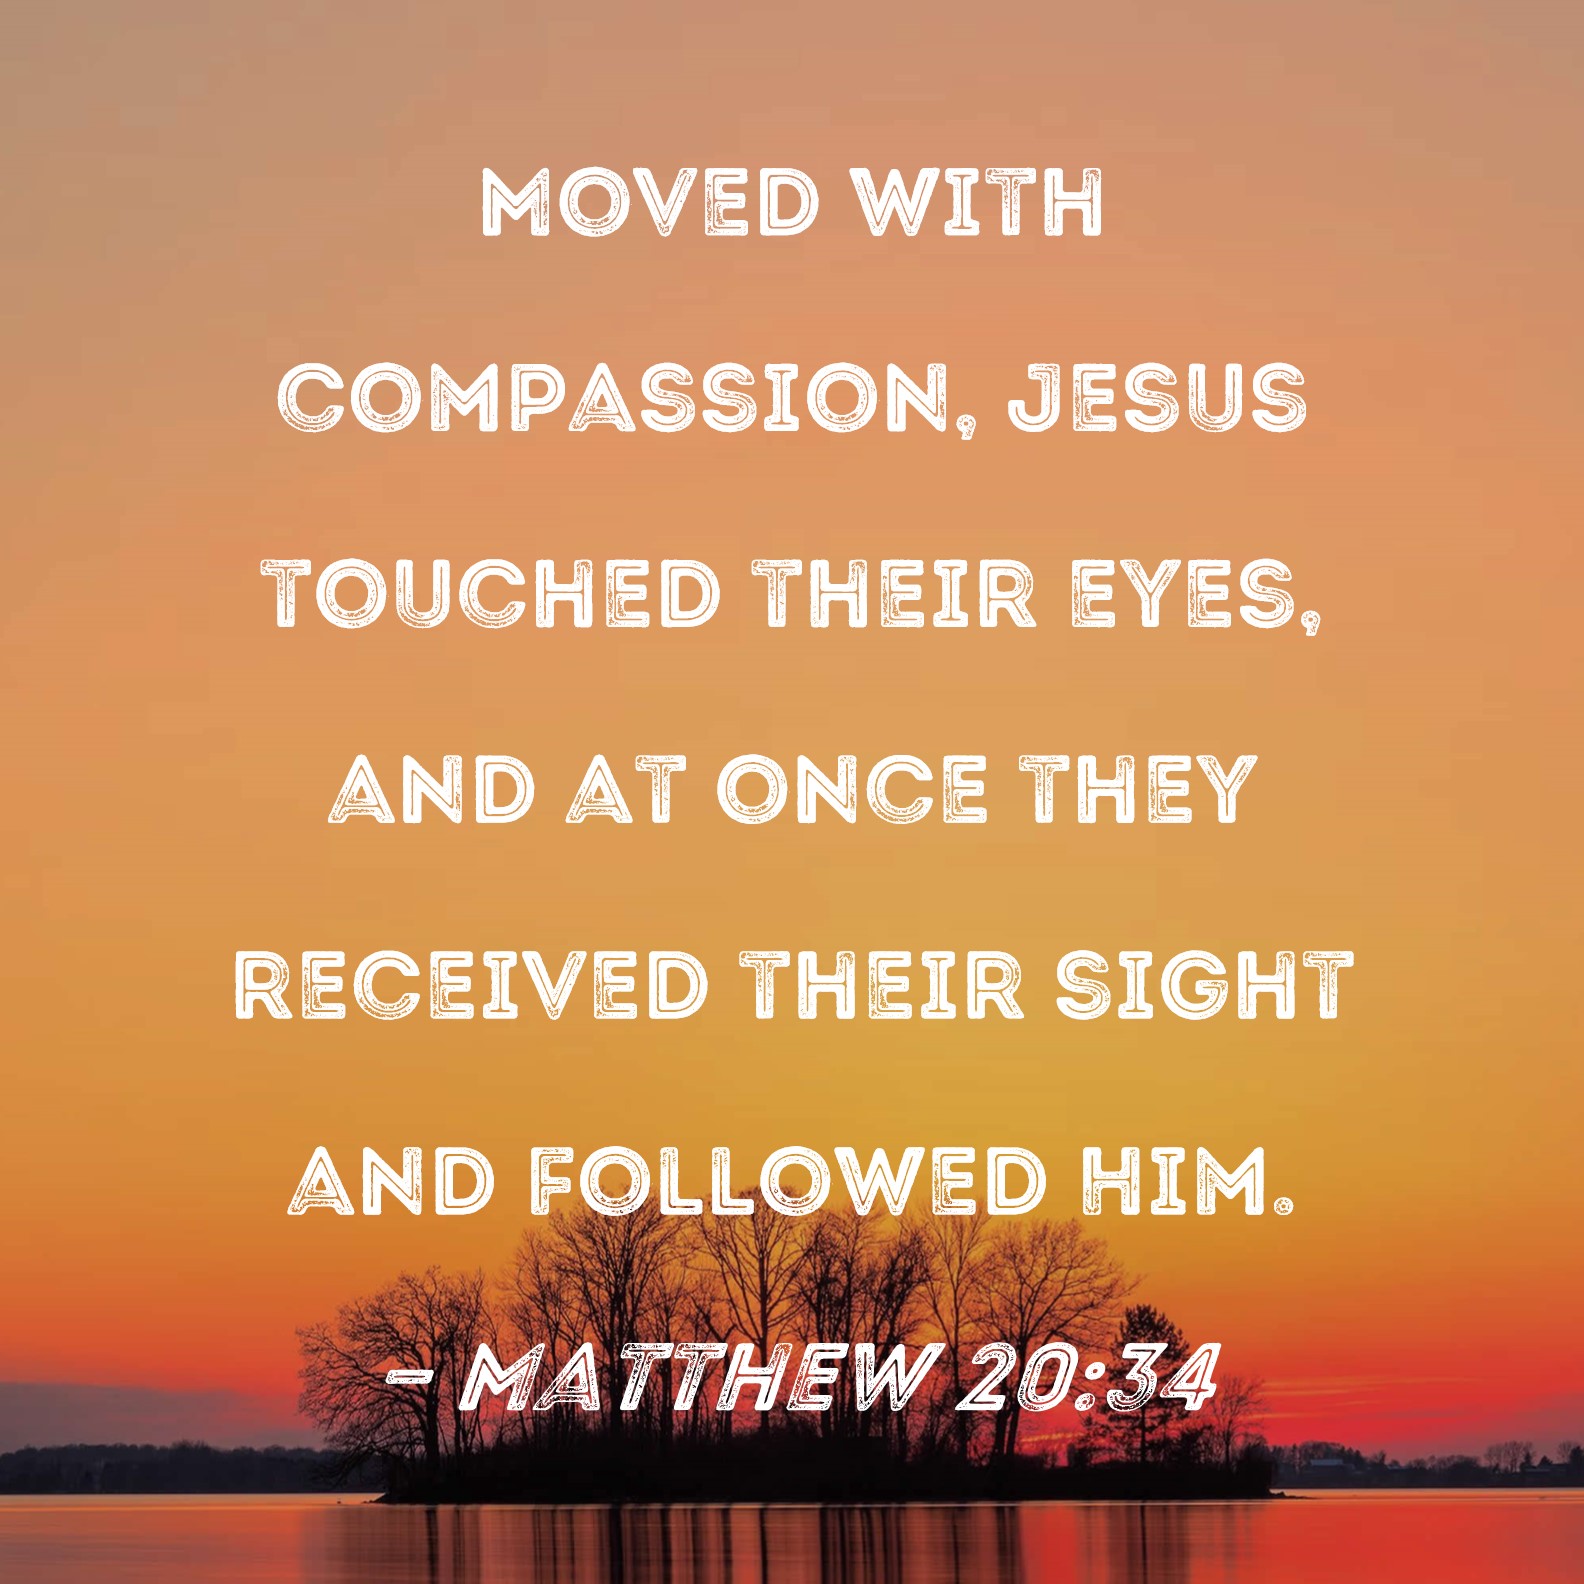 matthew-20-34-moved-with-compassion-jesus-touched-their-eyes-and-at